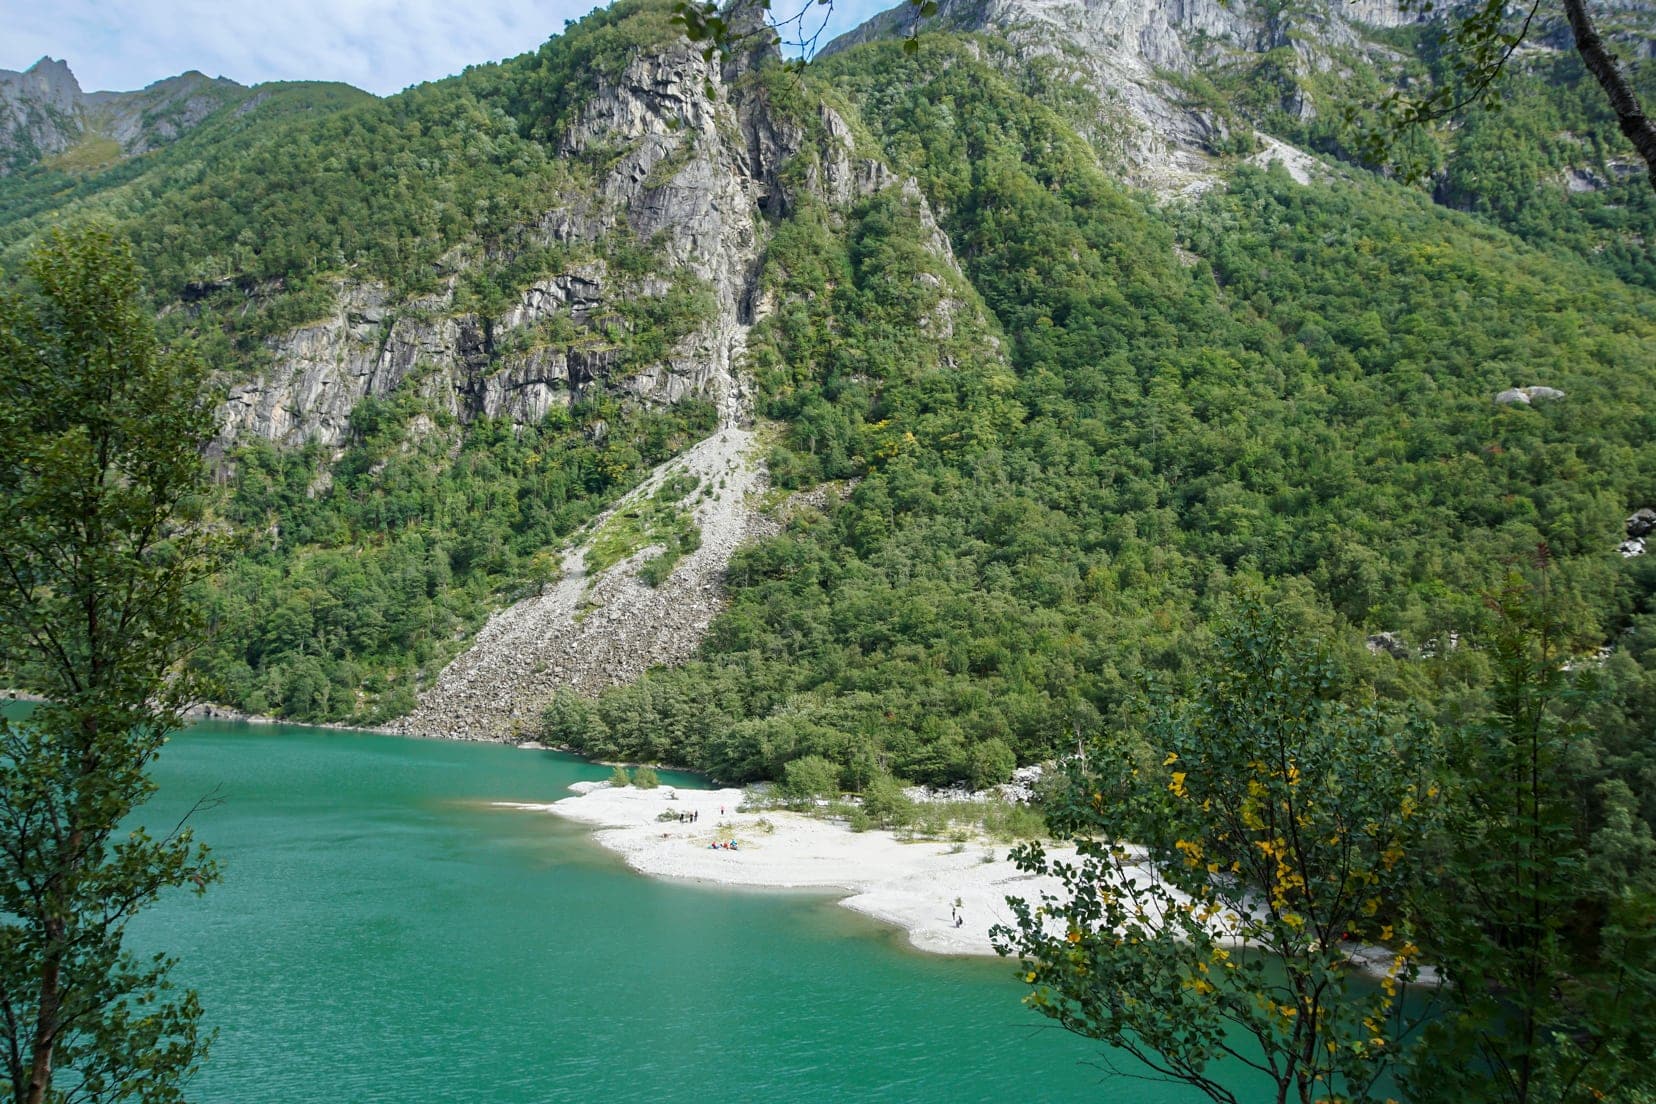 Green waters of a lake with surrounding mountains